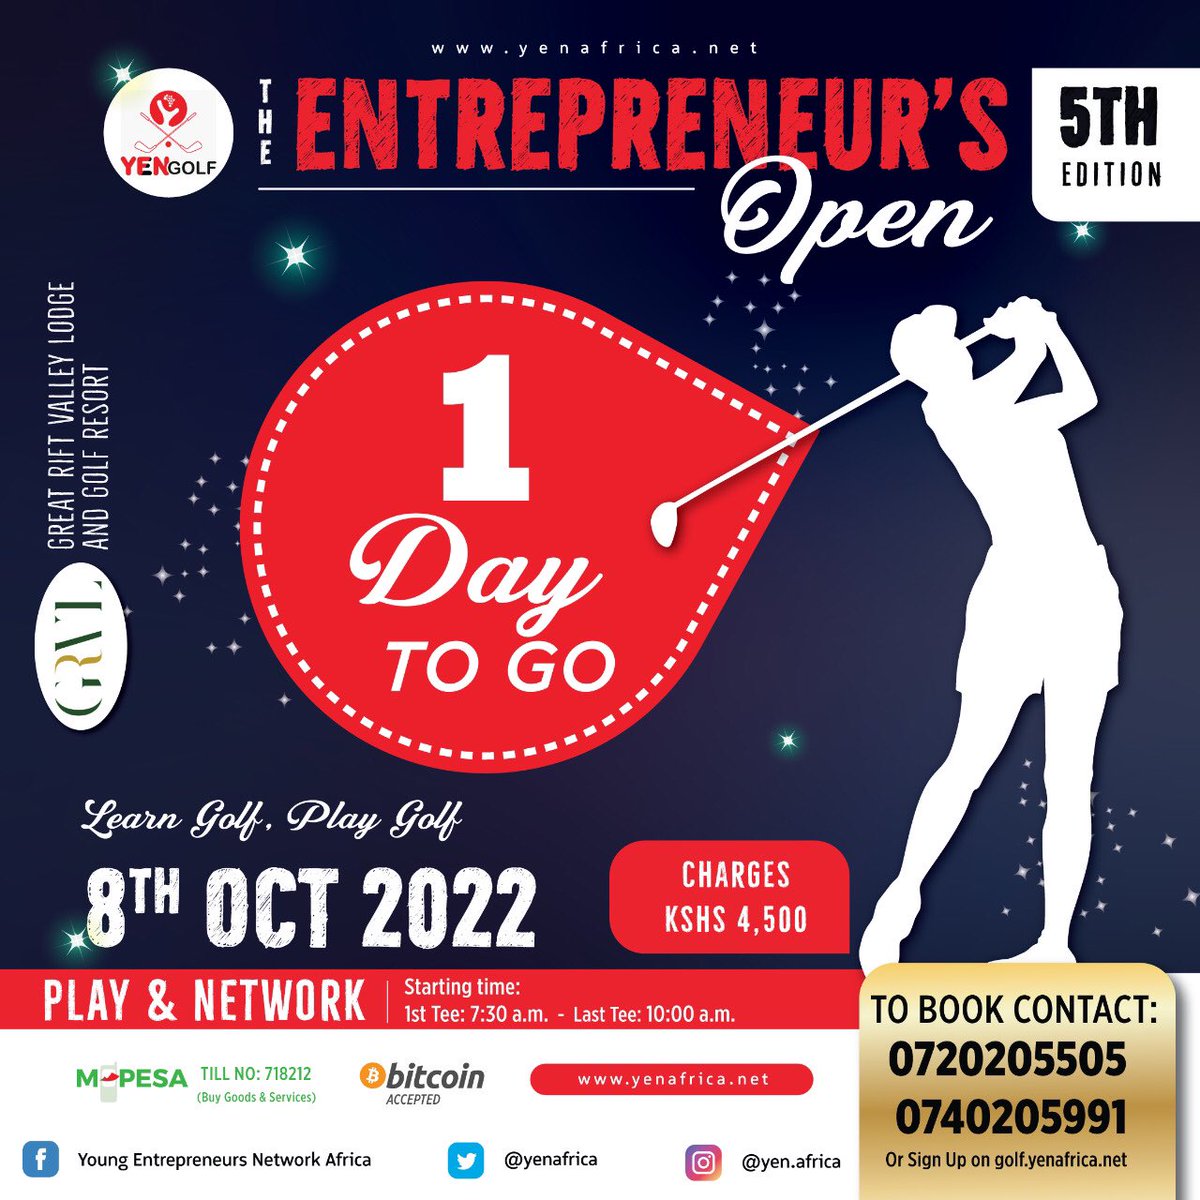 🏌️‍♂️Just one more day to go! #YENGolf #EntrepreneursOpen #YENGolfTournament #GolfTournament